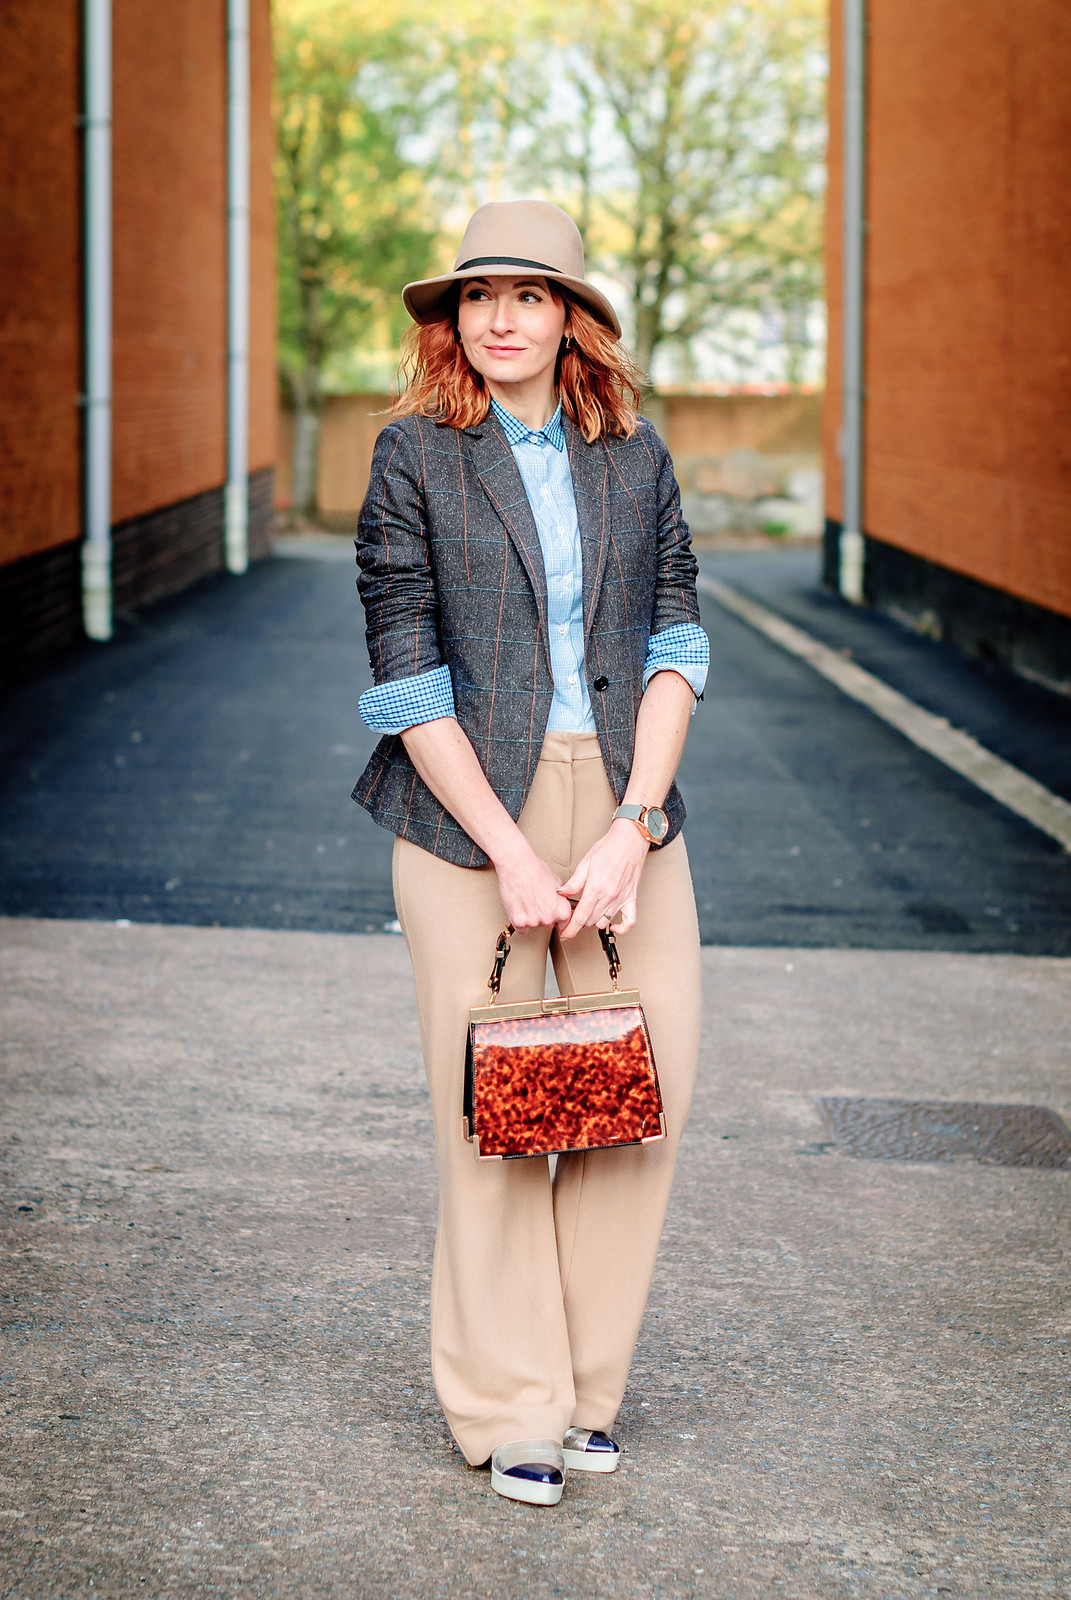 Smart British tailoring by Arthur Shirtley: Check shirt tweed silk blazer camel wide leg trousers silver slip on sneakers tortoiseshell bag camel fedora | Not Dressed As Lamb, over 40 style